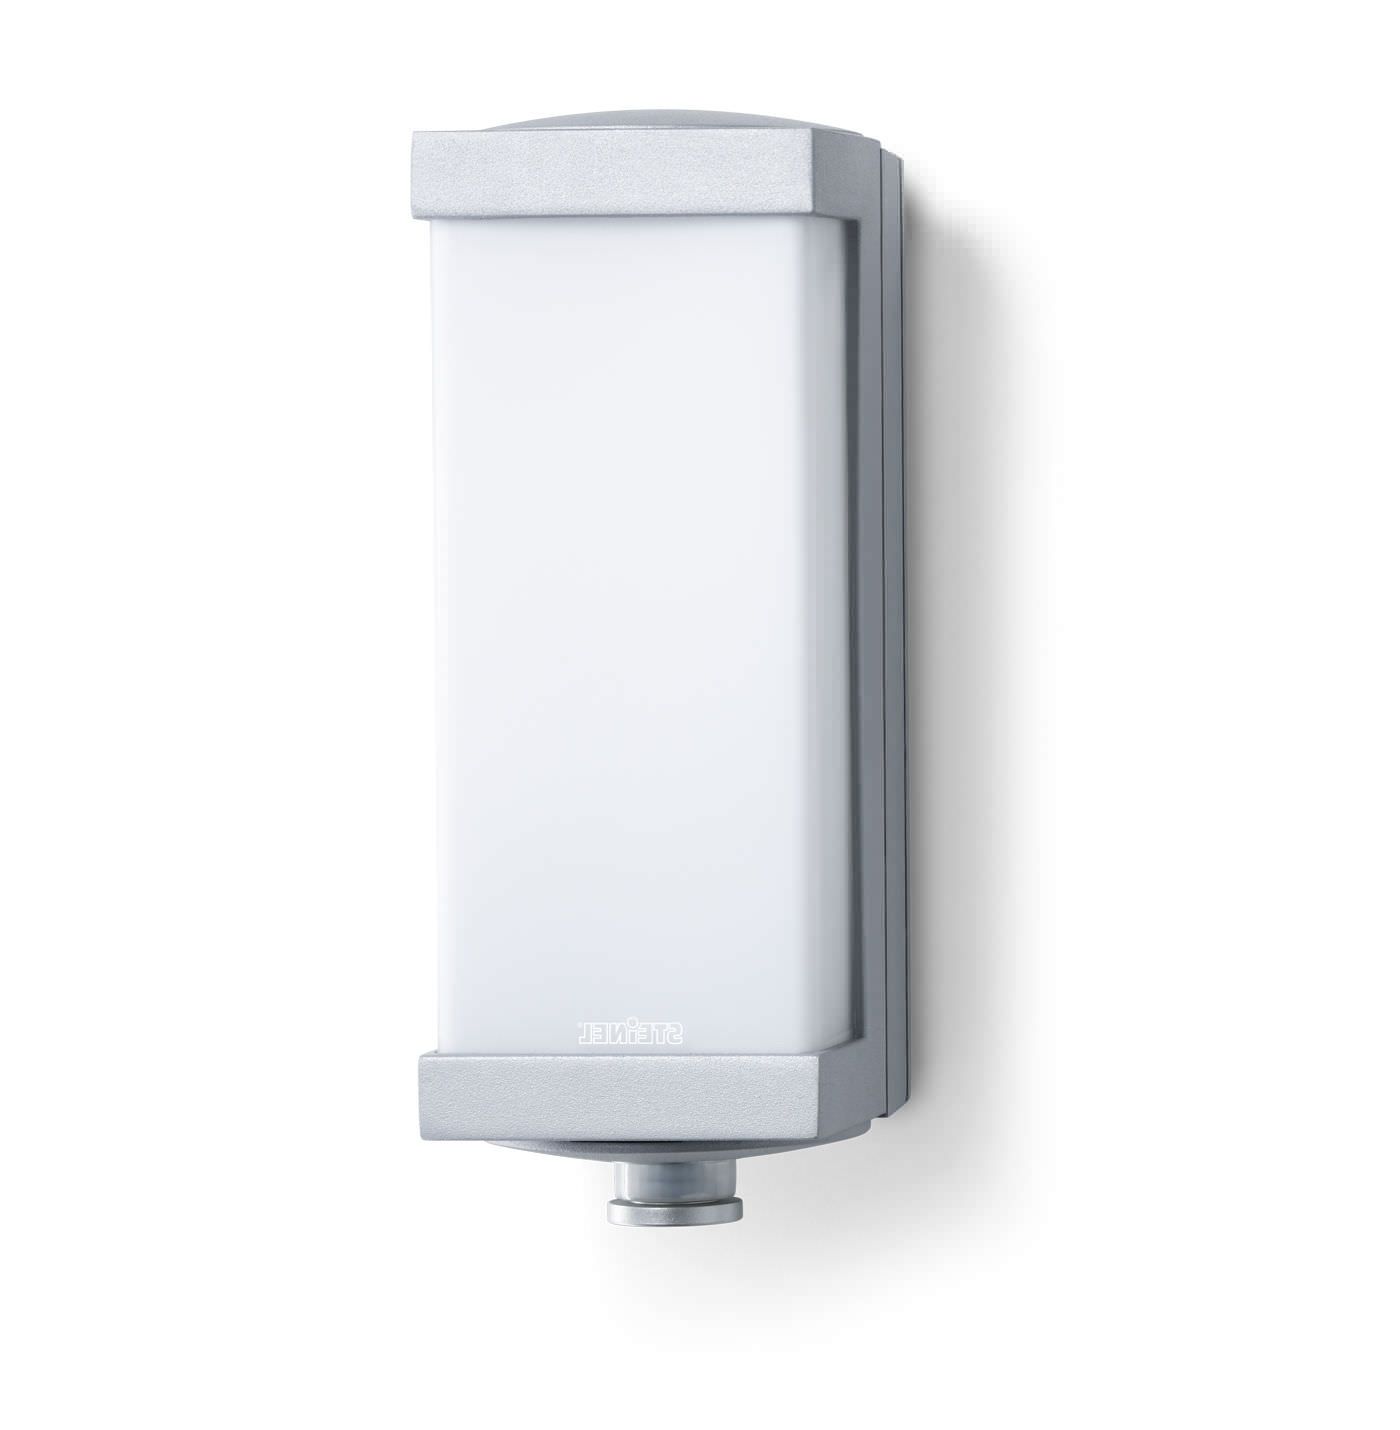 Led Outdoor Wall Lights Lanea With Motion Sensor Within 2019 Outdoor Wall Lights With Motion Sensors • Outdoor Lighting (View 11 of 20)